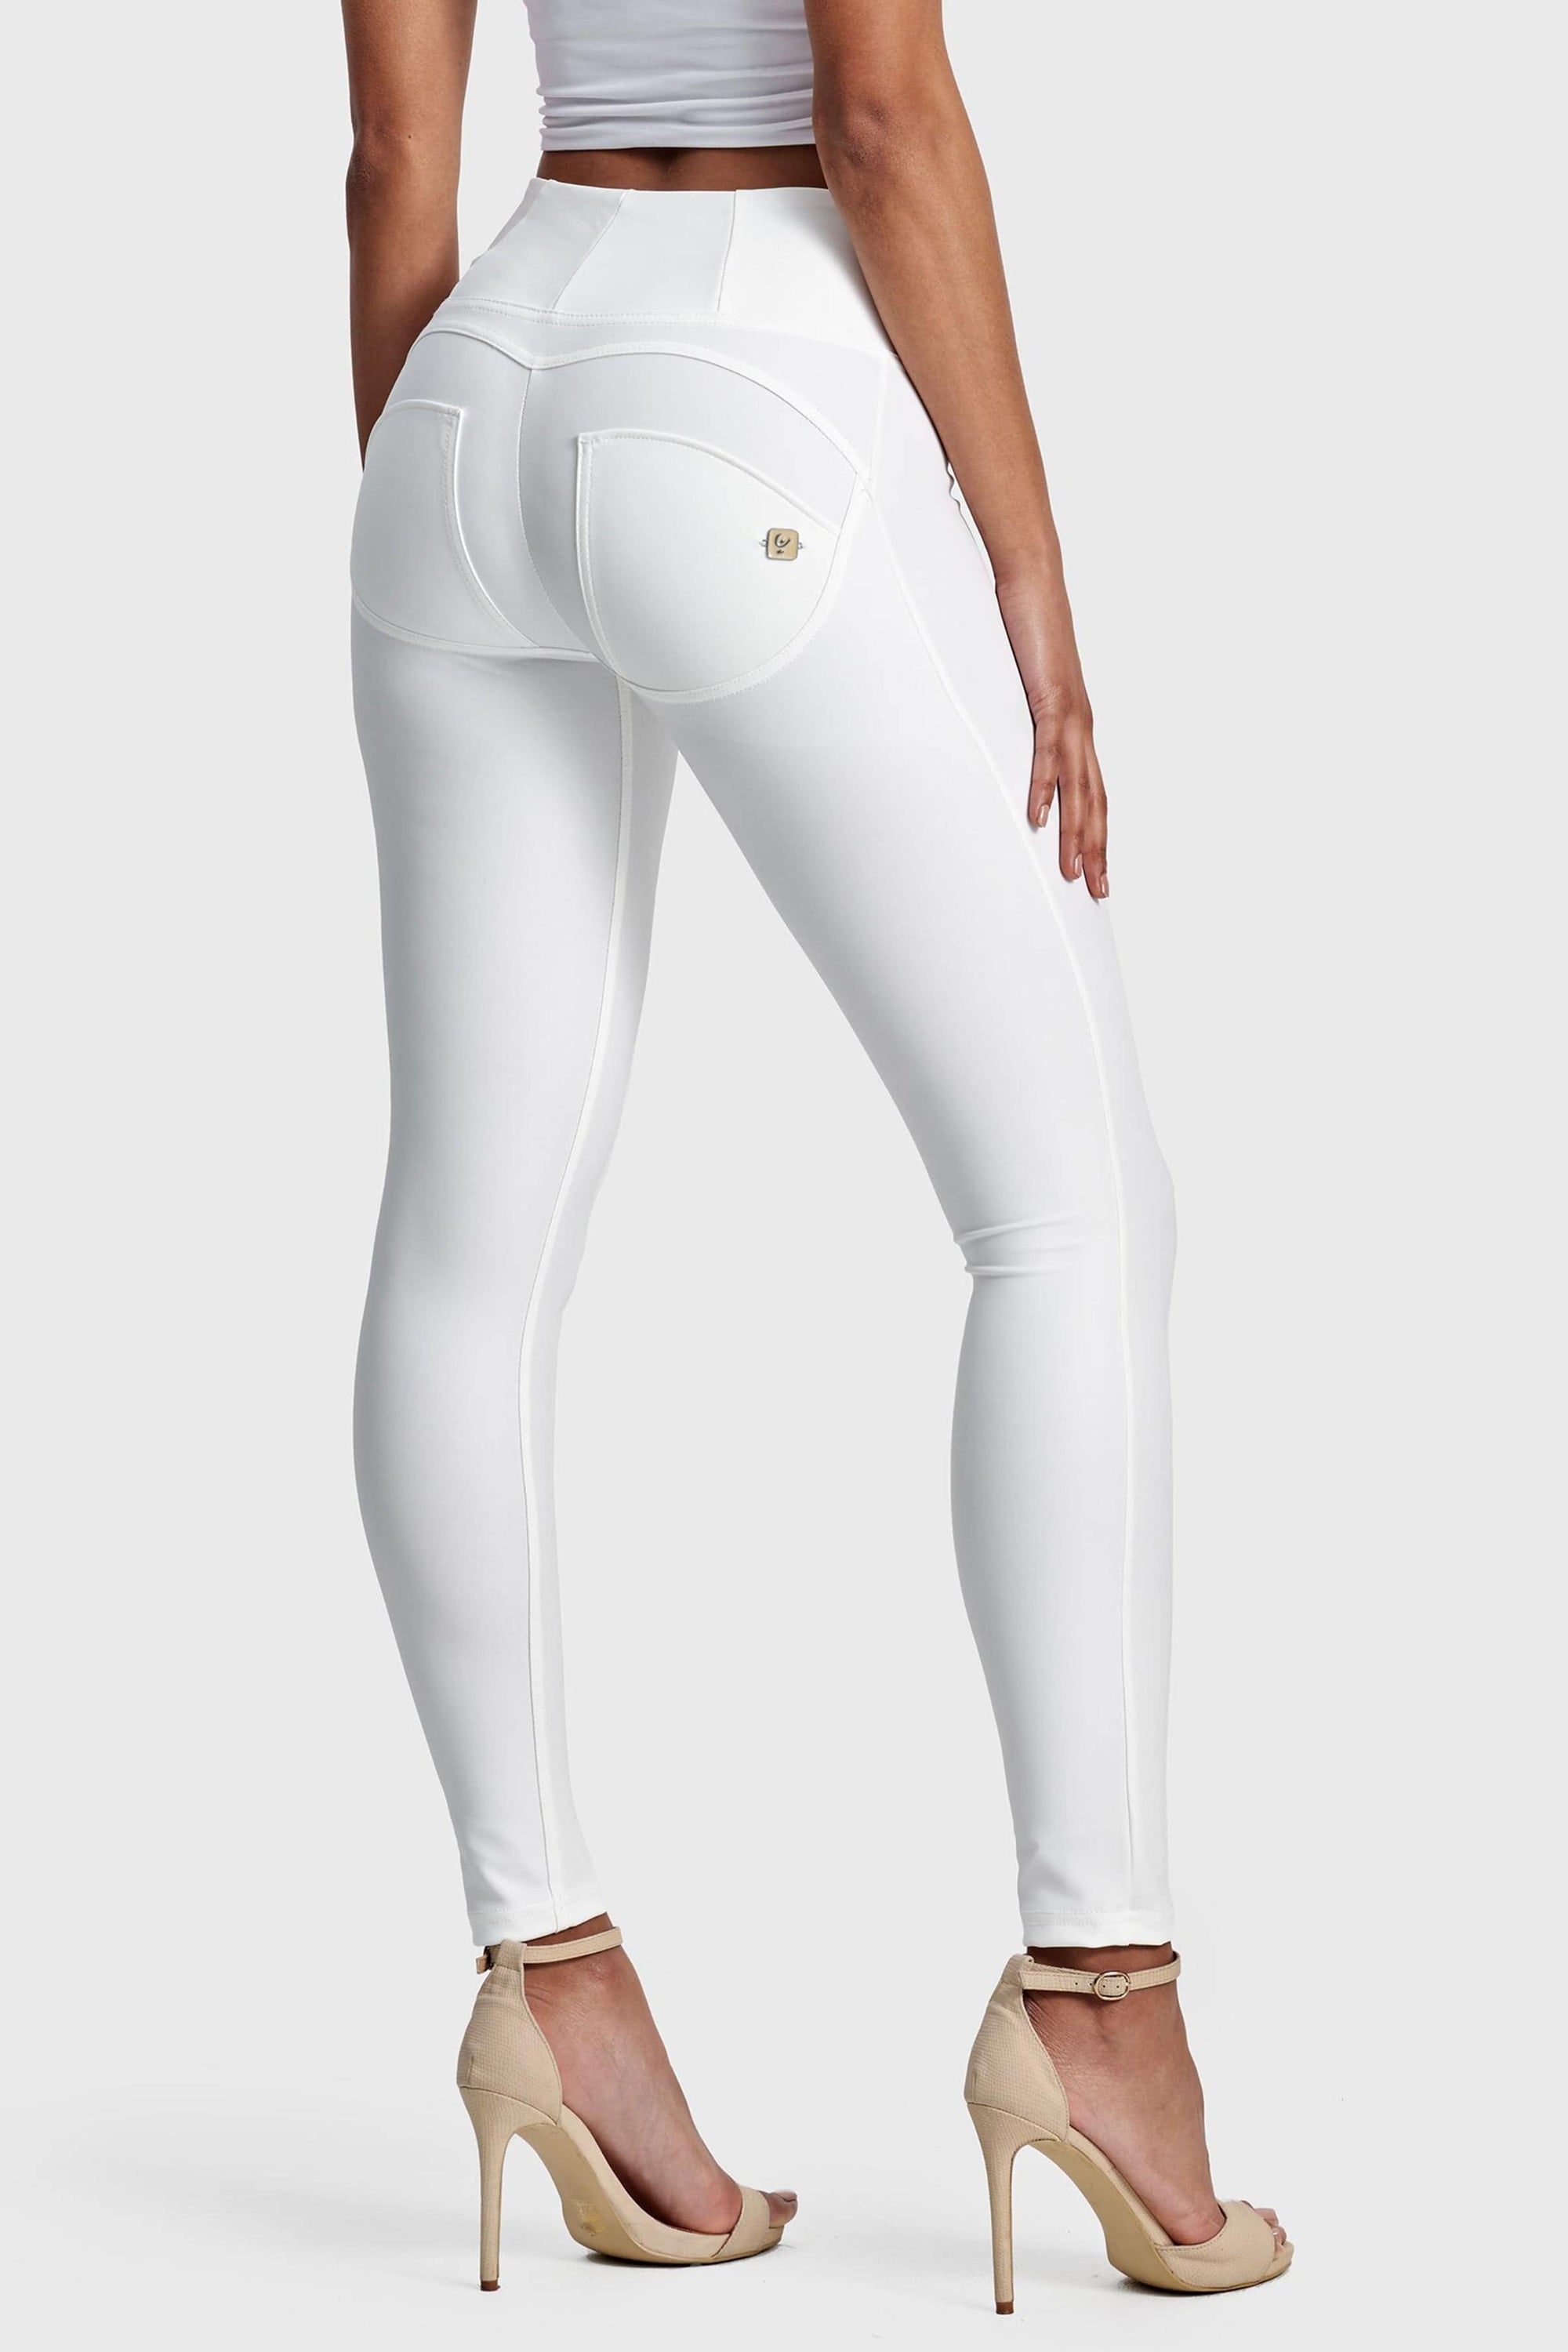 WR.UP® Faux Leather - High Waisted - Full Length - White 2